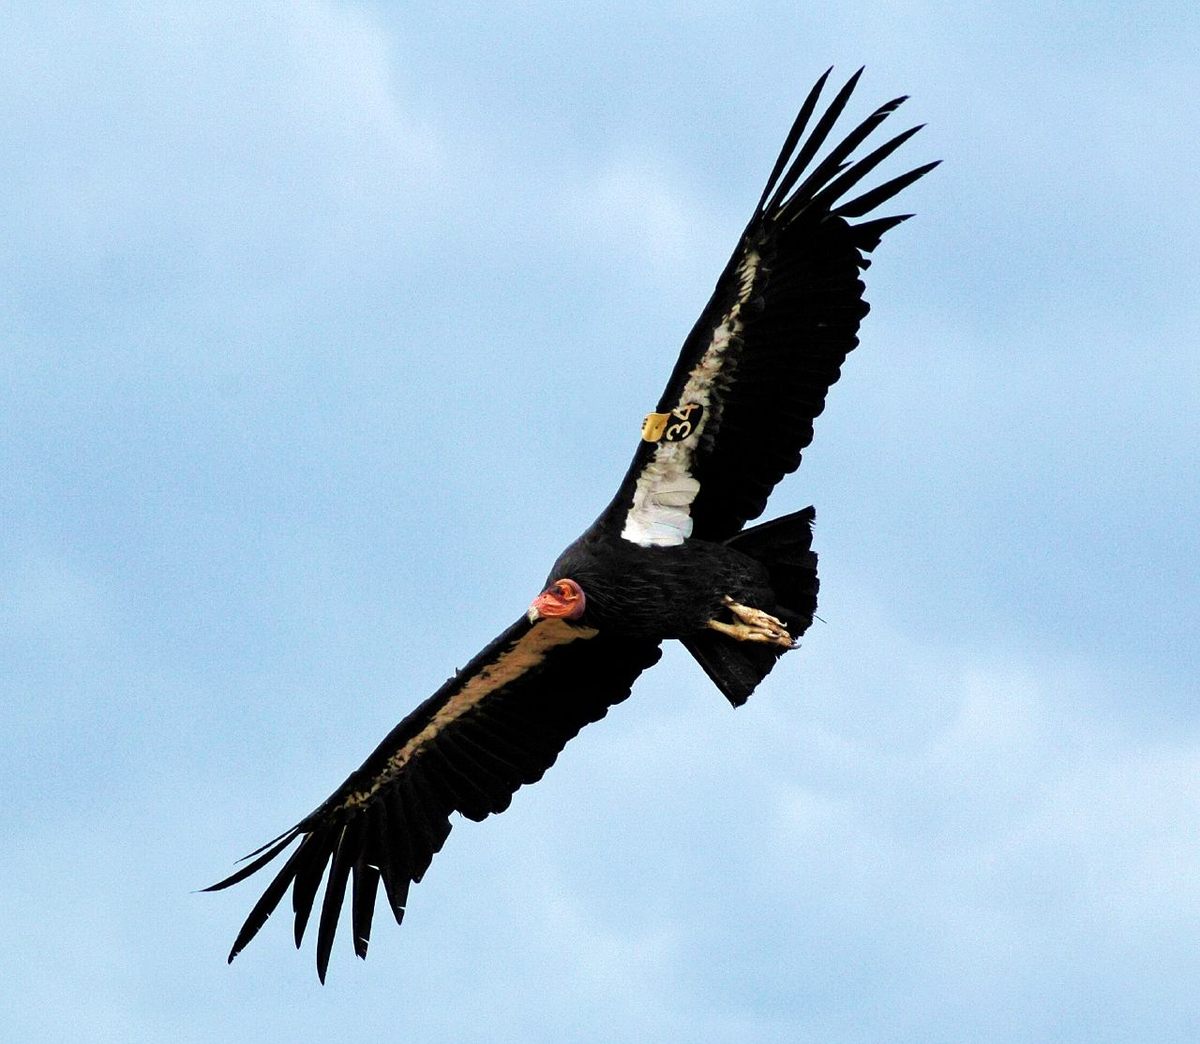 California condors, with a wingspan of up to 10 feet, are the largest birds in North America.